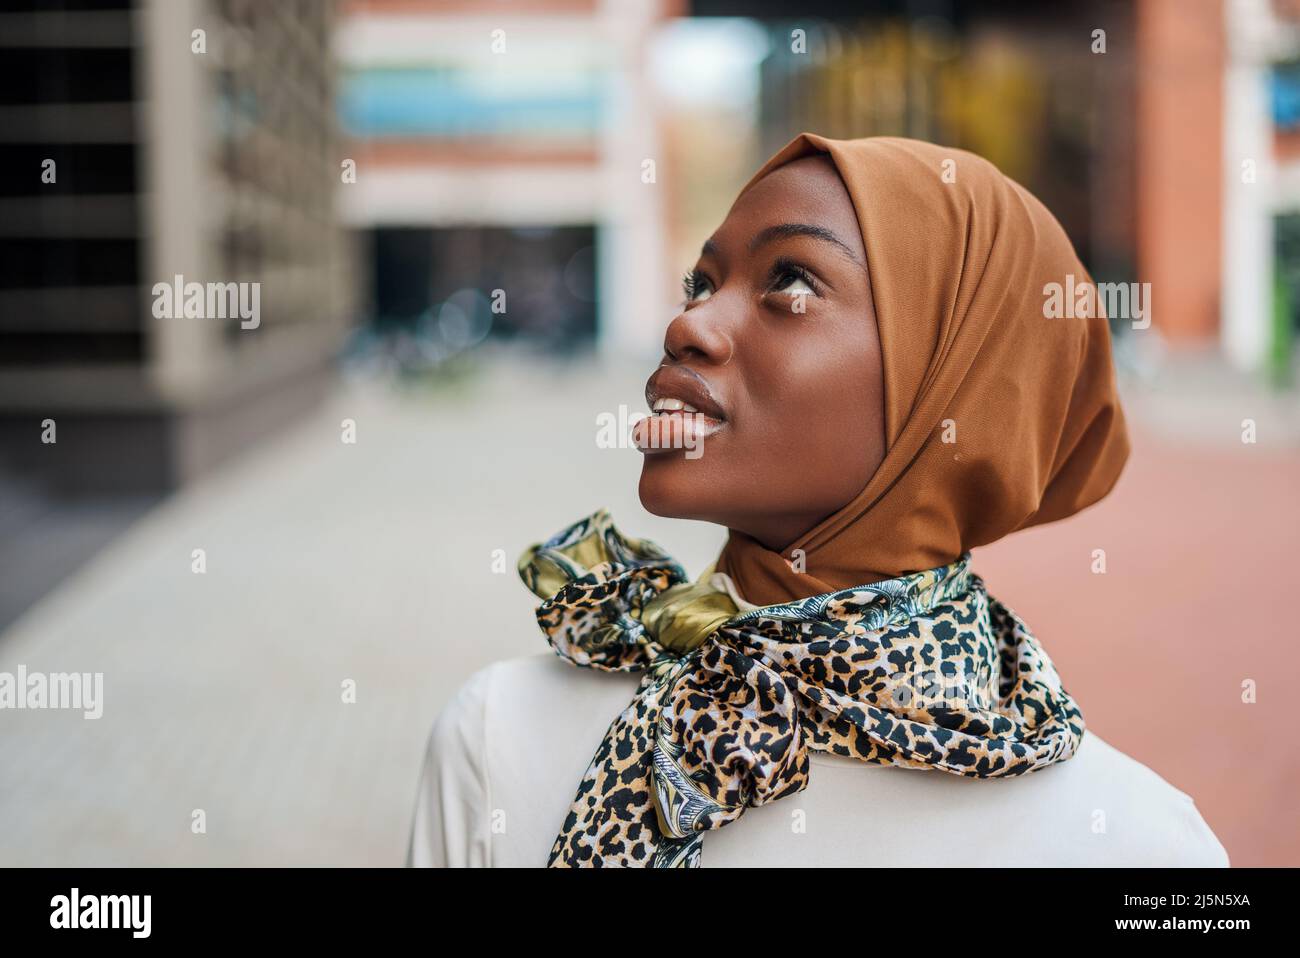 Young Muslim black woman in hijab looking up Stock Photo